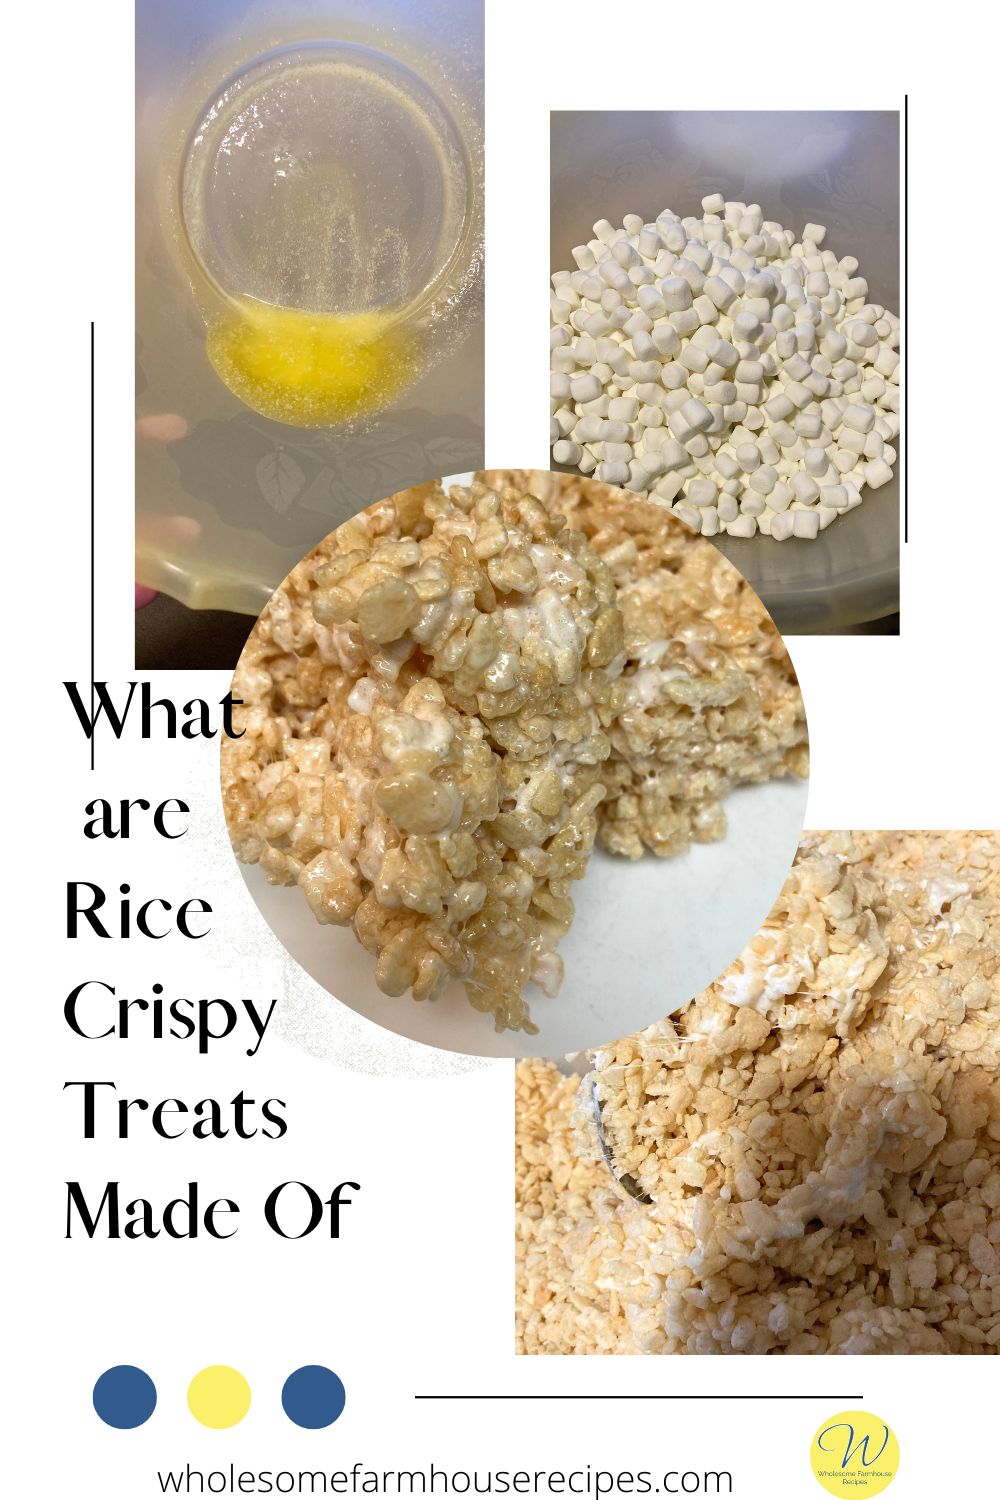 What are Rice Crispy Treats Made Of